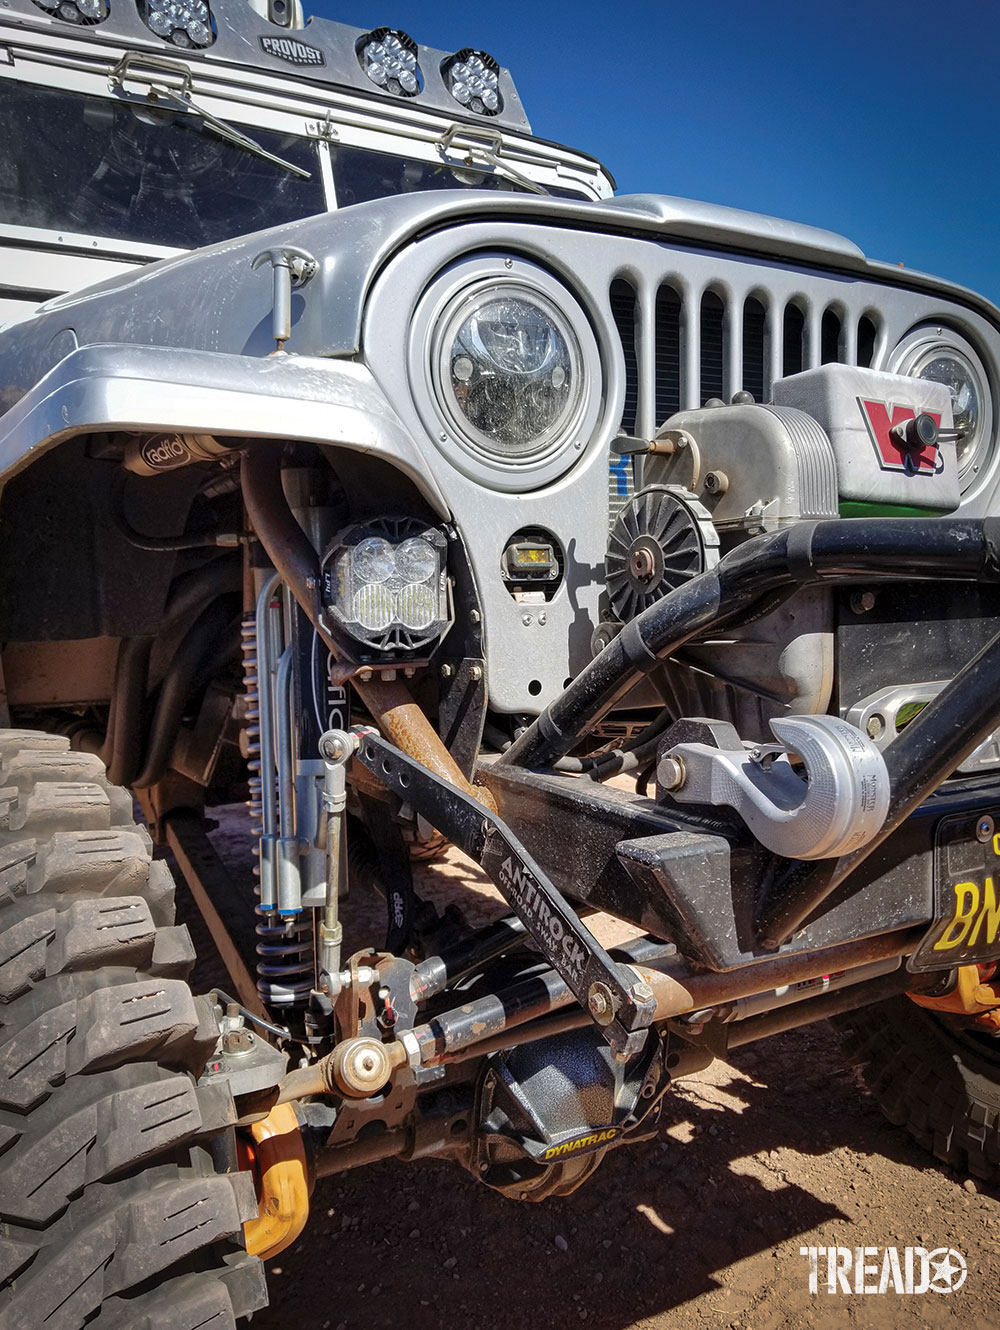 The silver Jeep called Bandoola has a custom front end with winch and tube bumper.